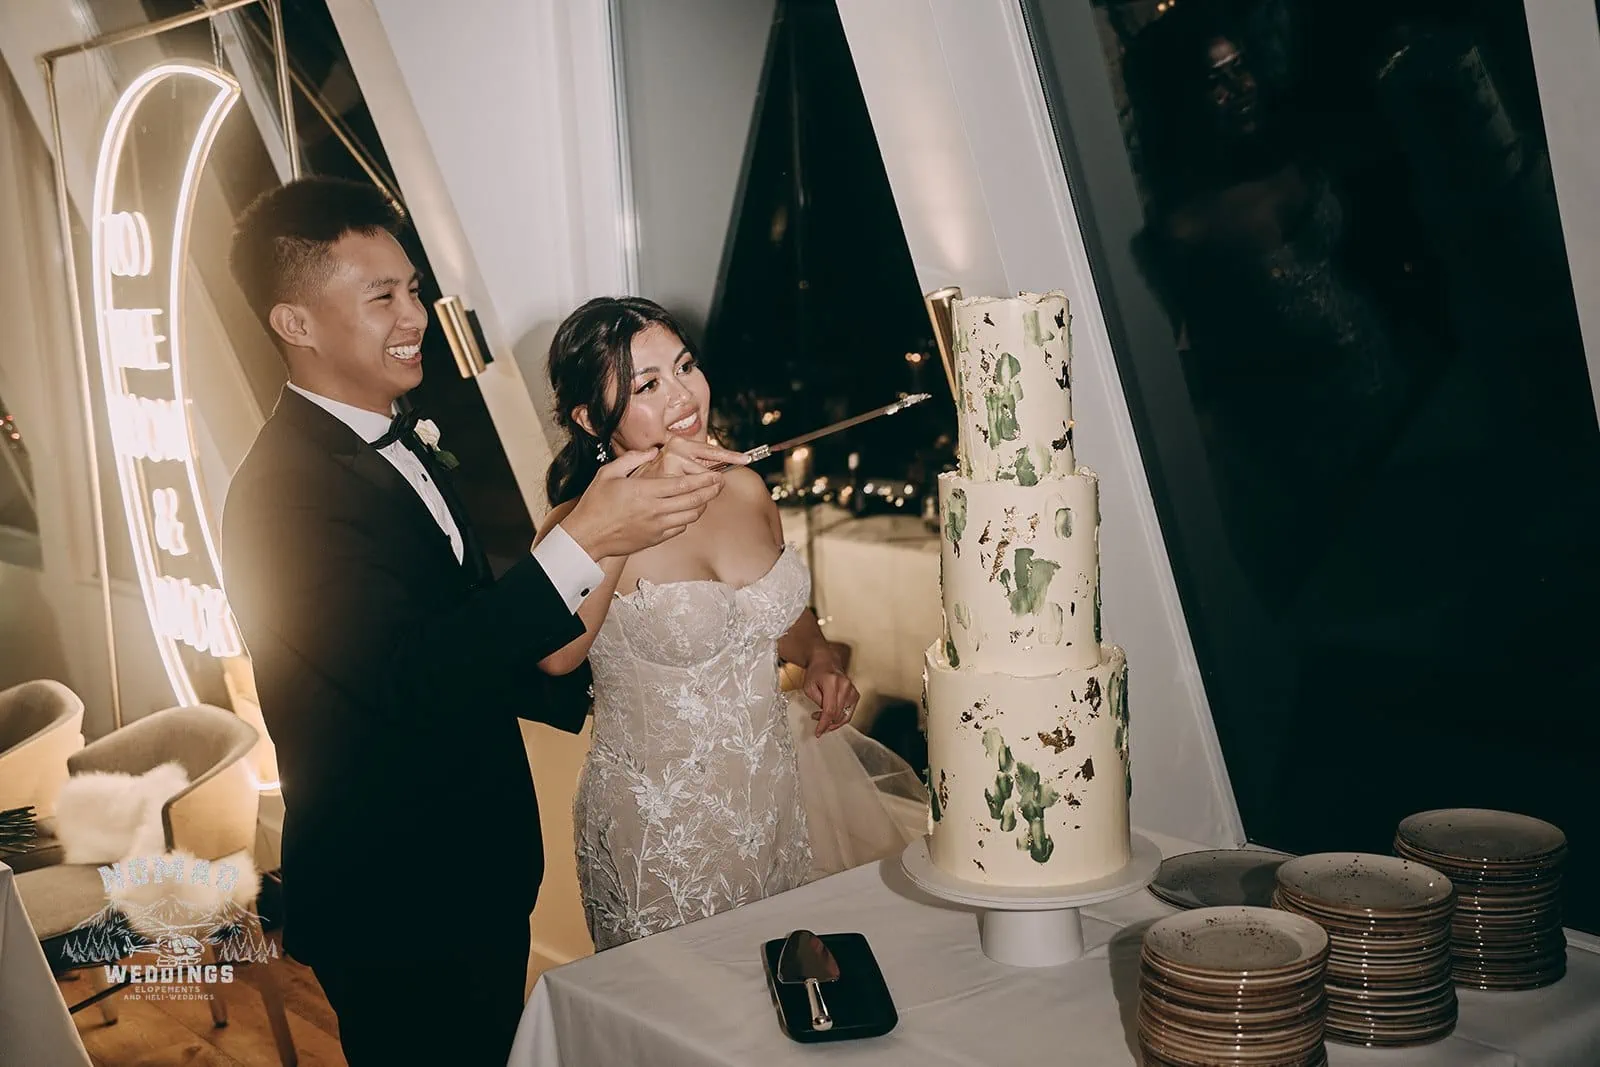 A couple cutting their wedding cake at night.